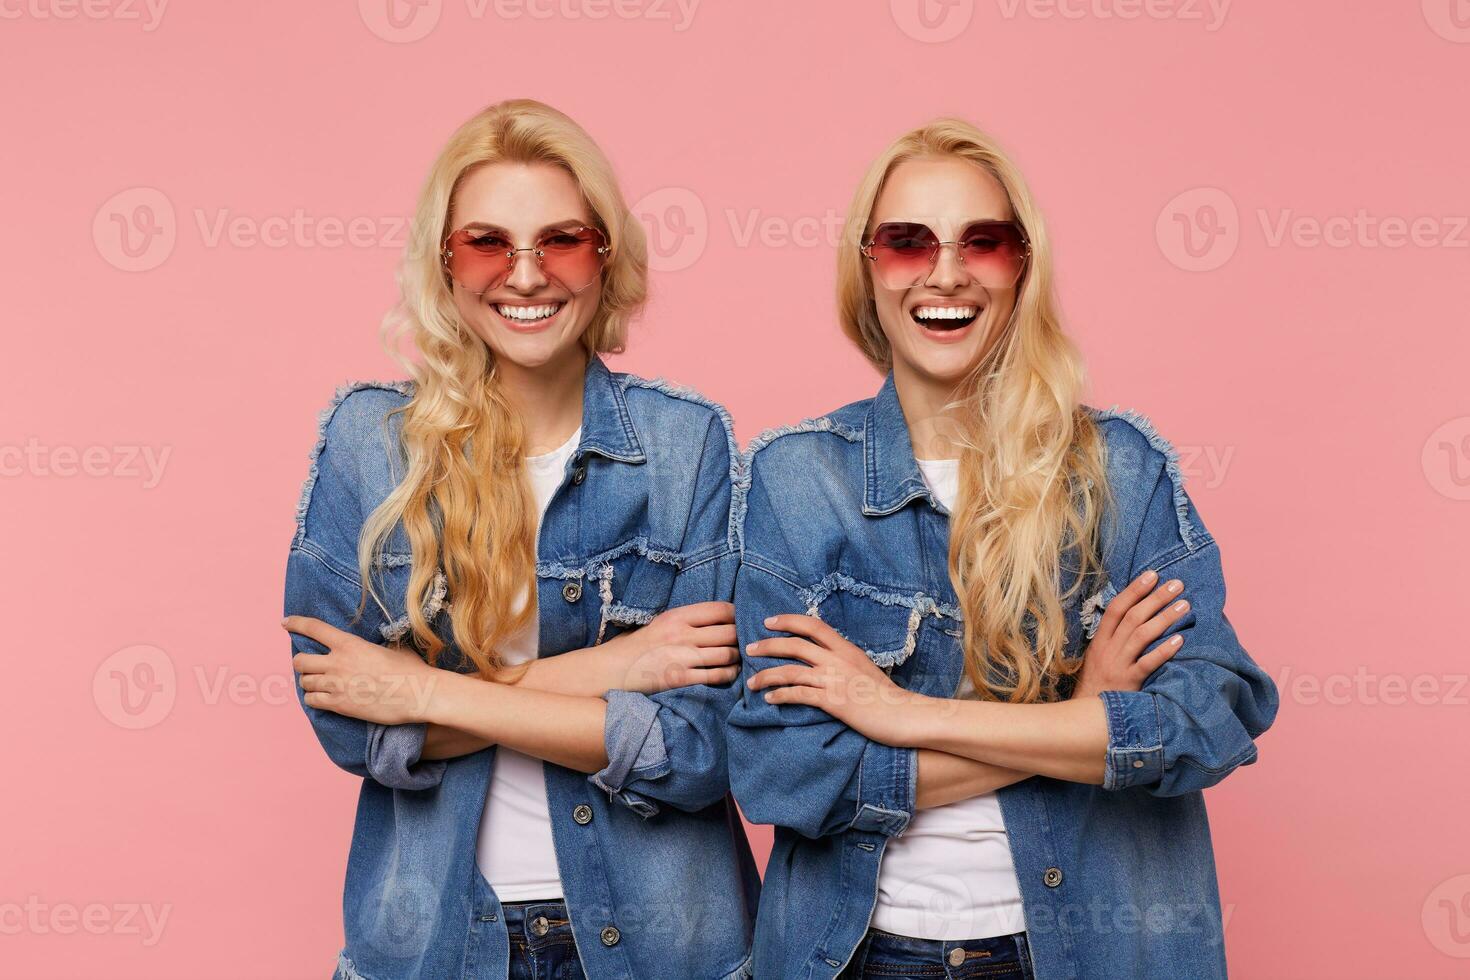 Joyful young lovely long haired blonde twins keeping hands crossed while looking happily at camera with broad smiles, isolated against pink background photo